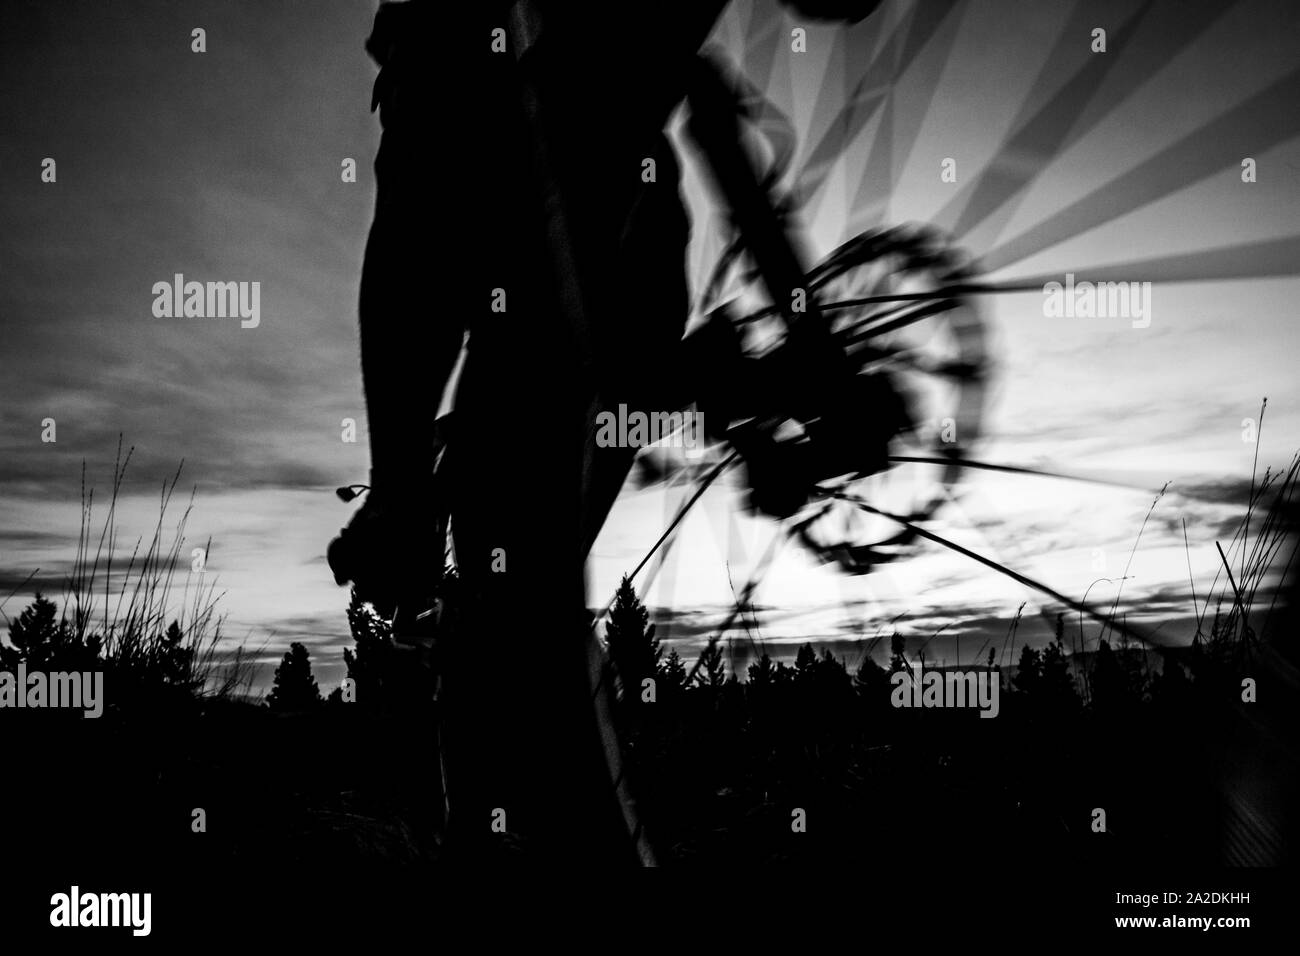 A blurred black and white image of a mountain biker silhouetted. Stock Photo